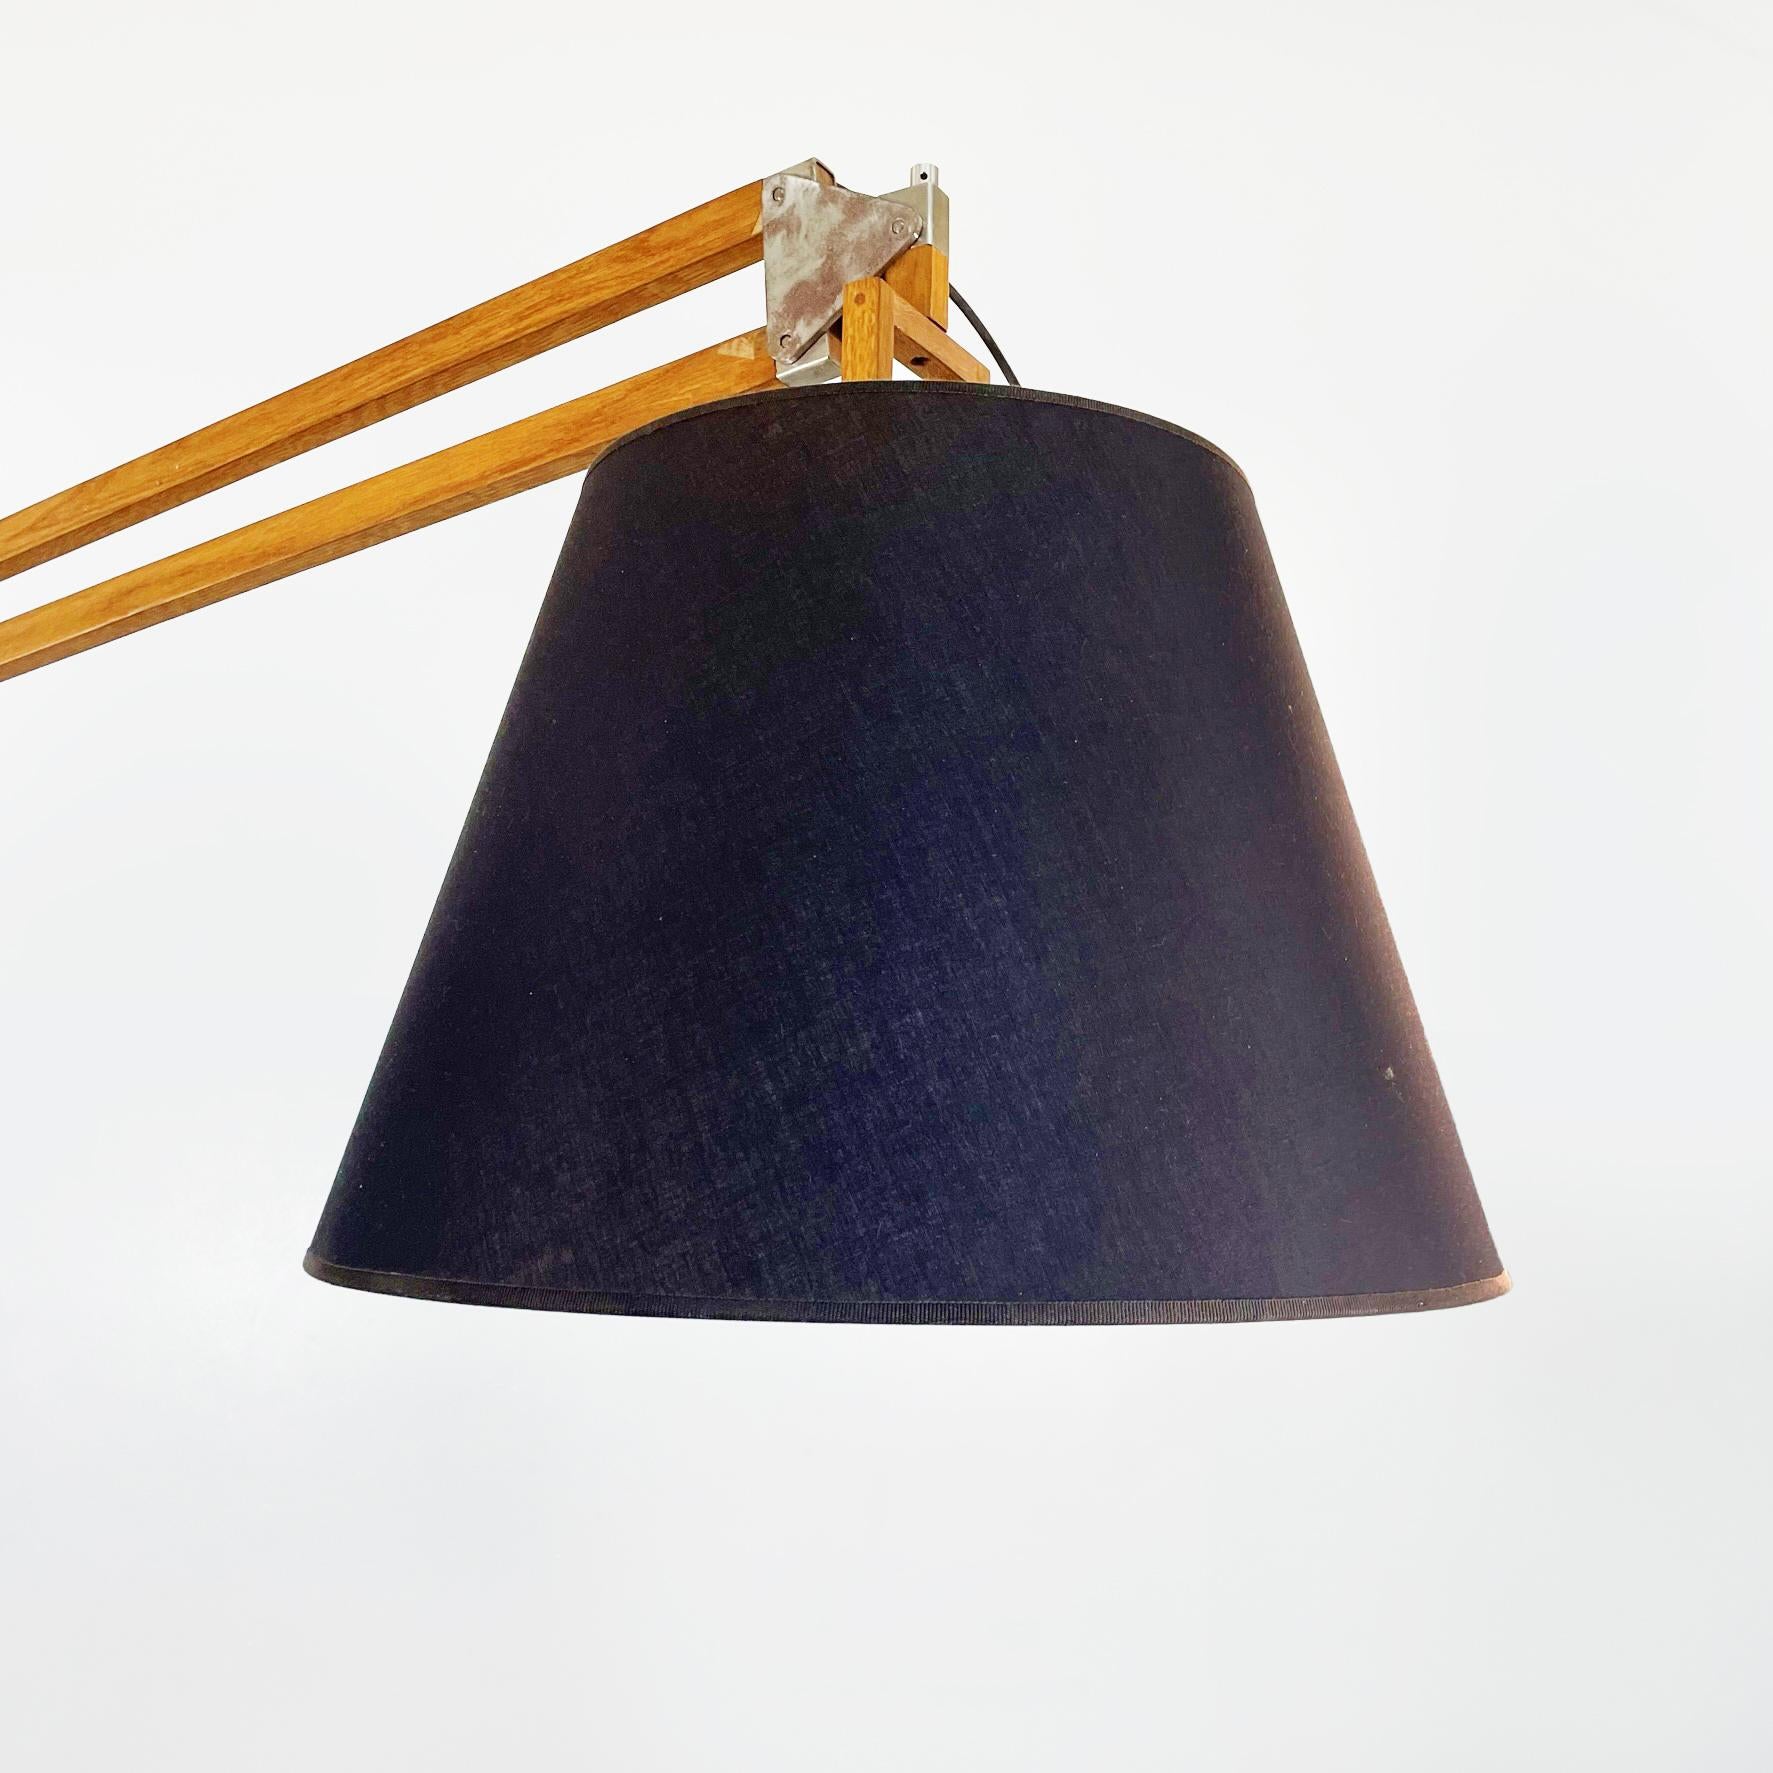 Italian Modern 21st Century Wooden and Iron Floor Lamp Golia, 2000s In Good Condition For Sale In MIlano, IT